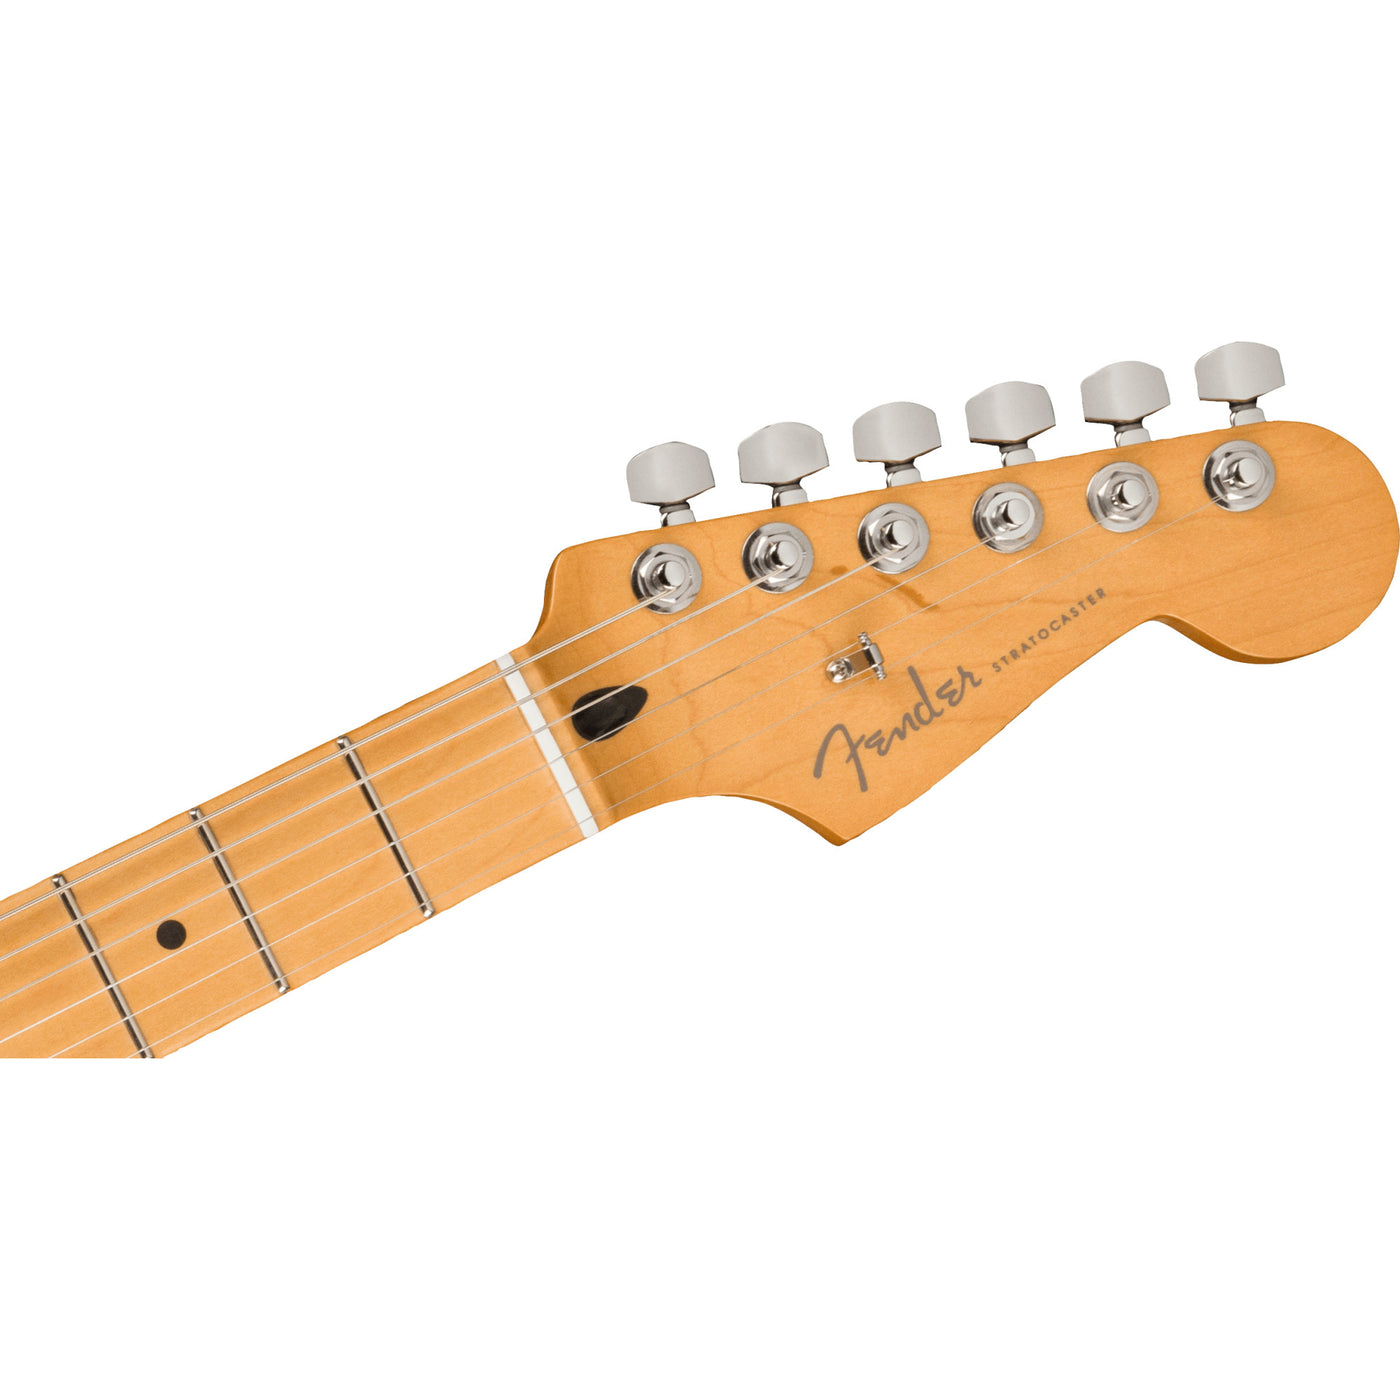 Fender Player Plus Stratocaster Electric Guitar, Tequila Sunrise (0147312387)